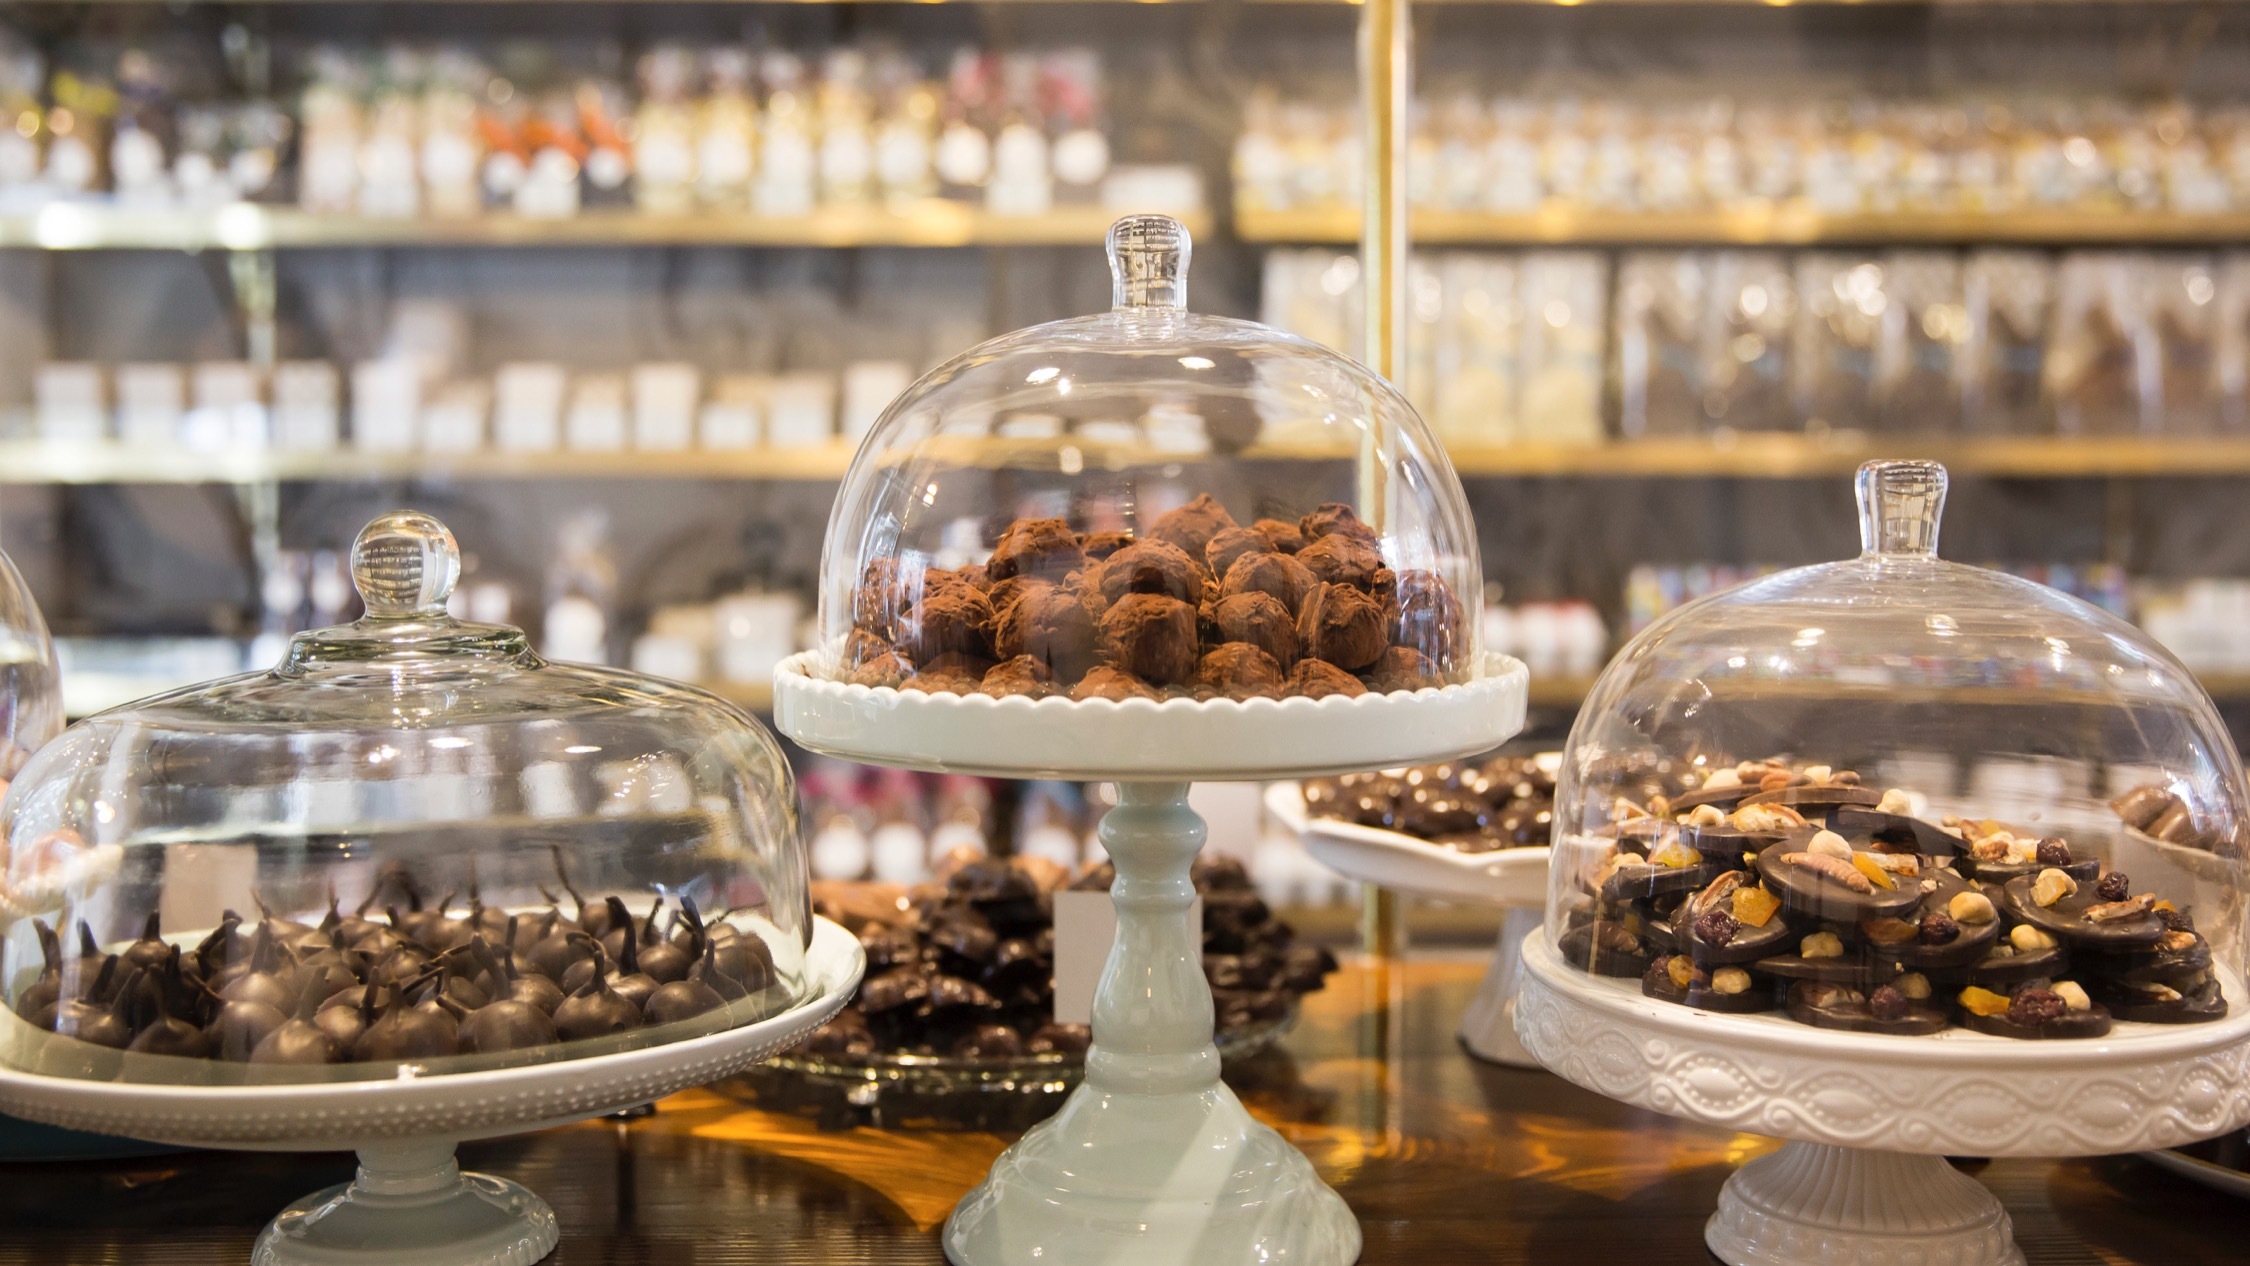 The best chocolate shops in Sydney